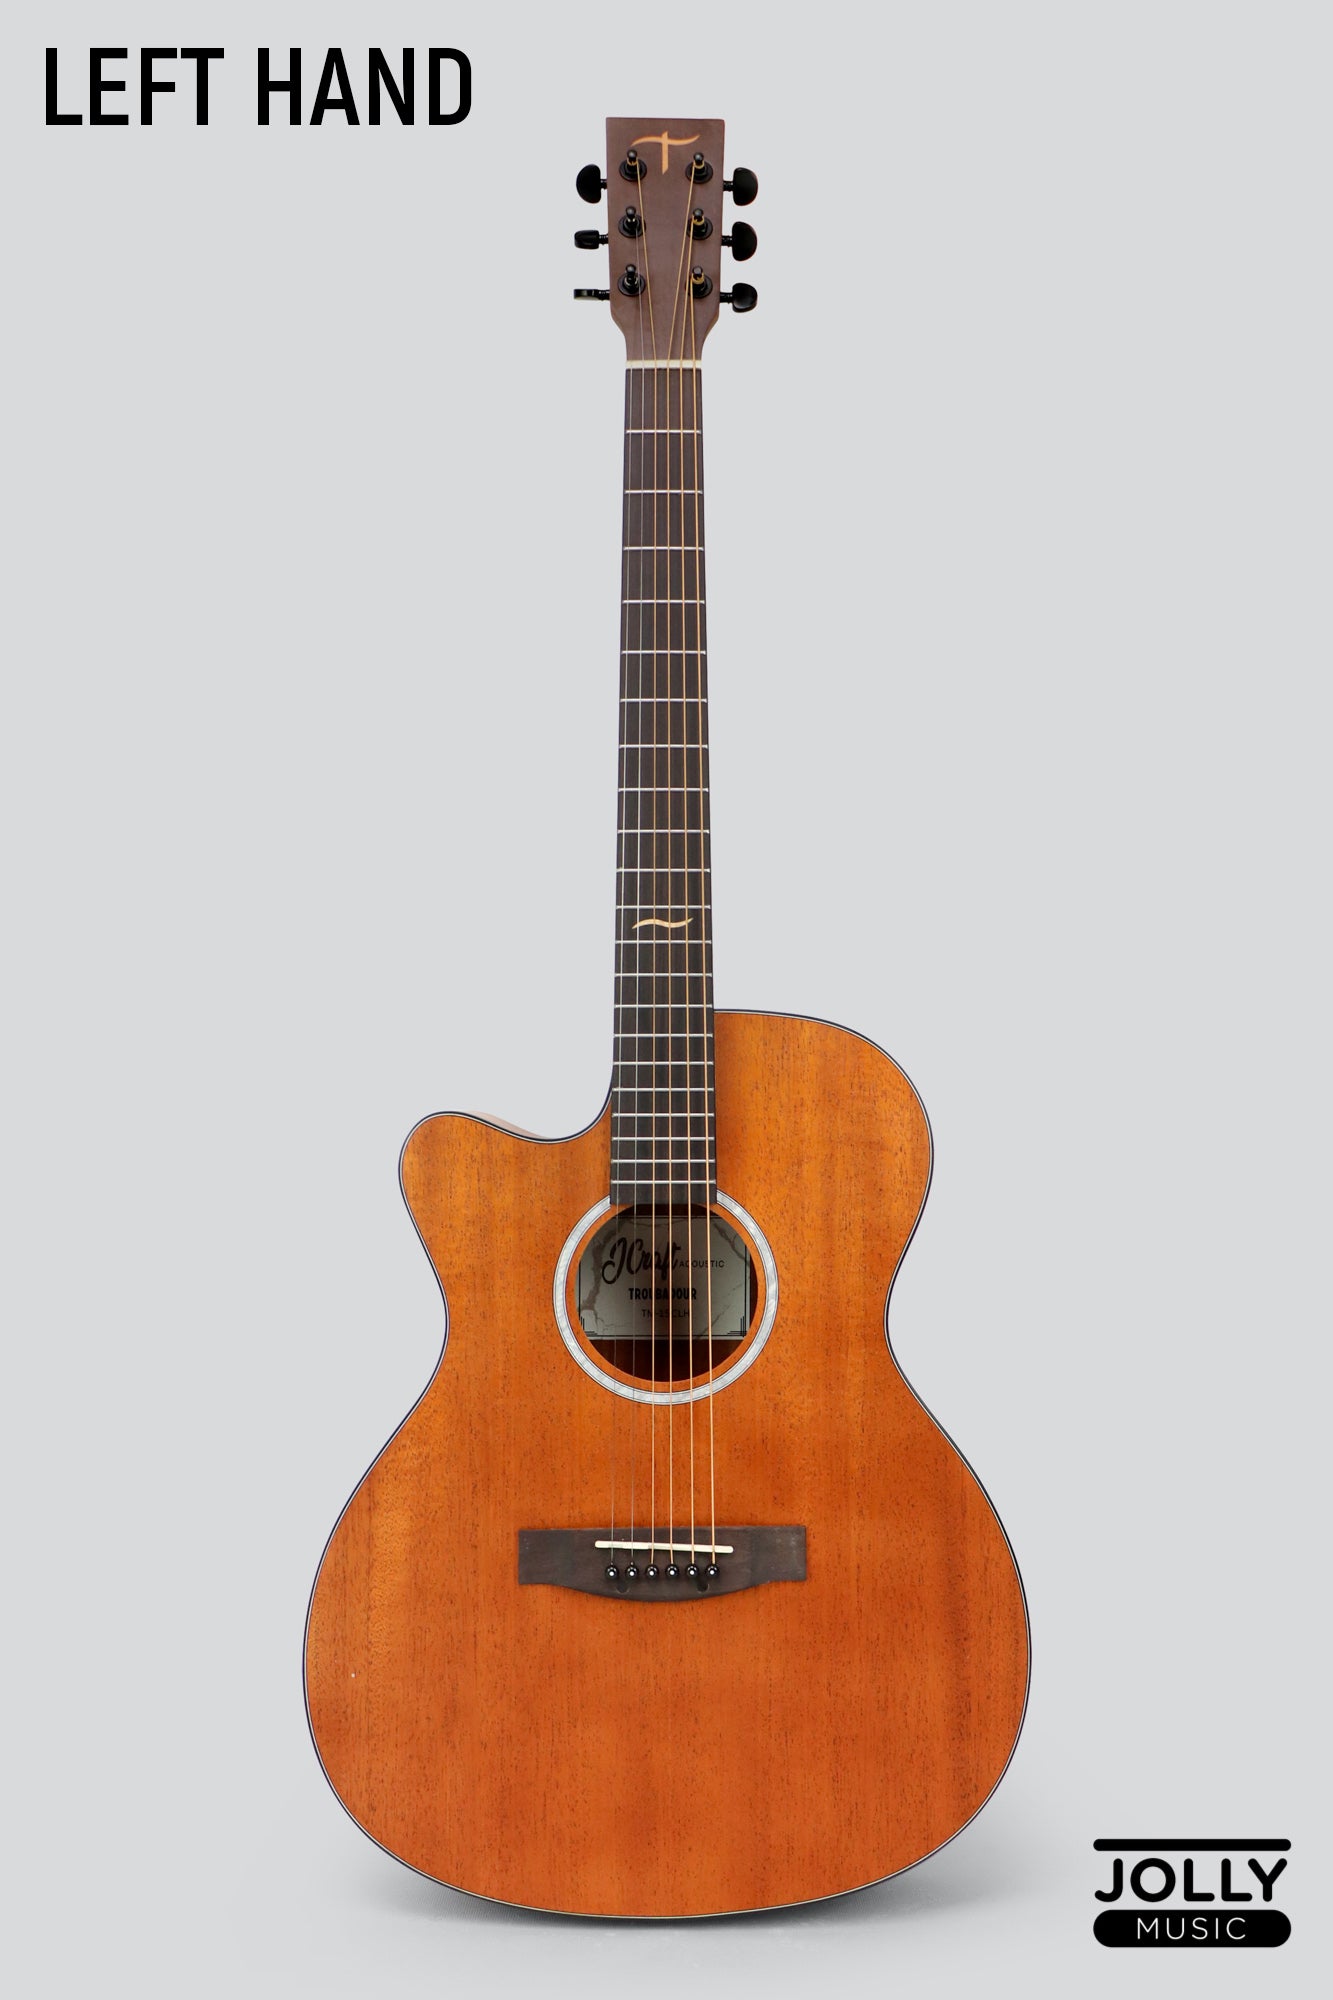 JCraft Troubadour TM-15C LEFT HAND All-Mahogany Orchestra Cutaway Acoustic Guitar with soft case